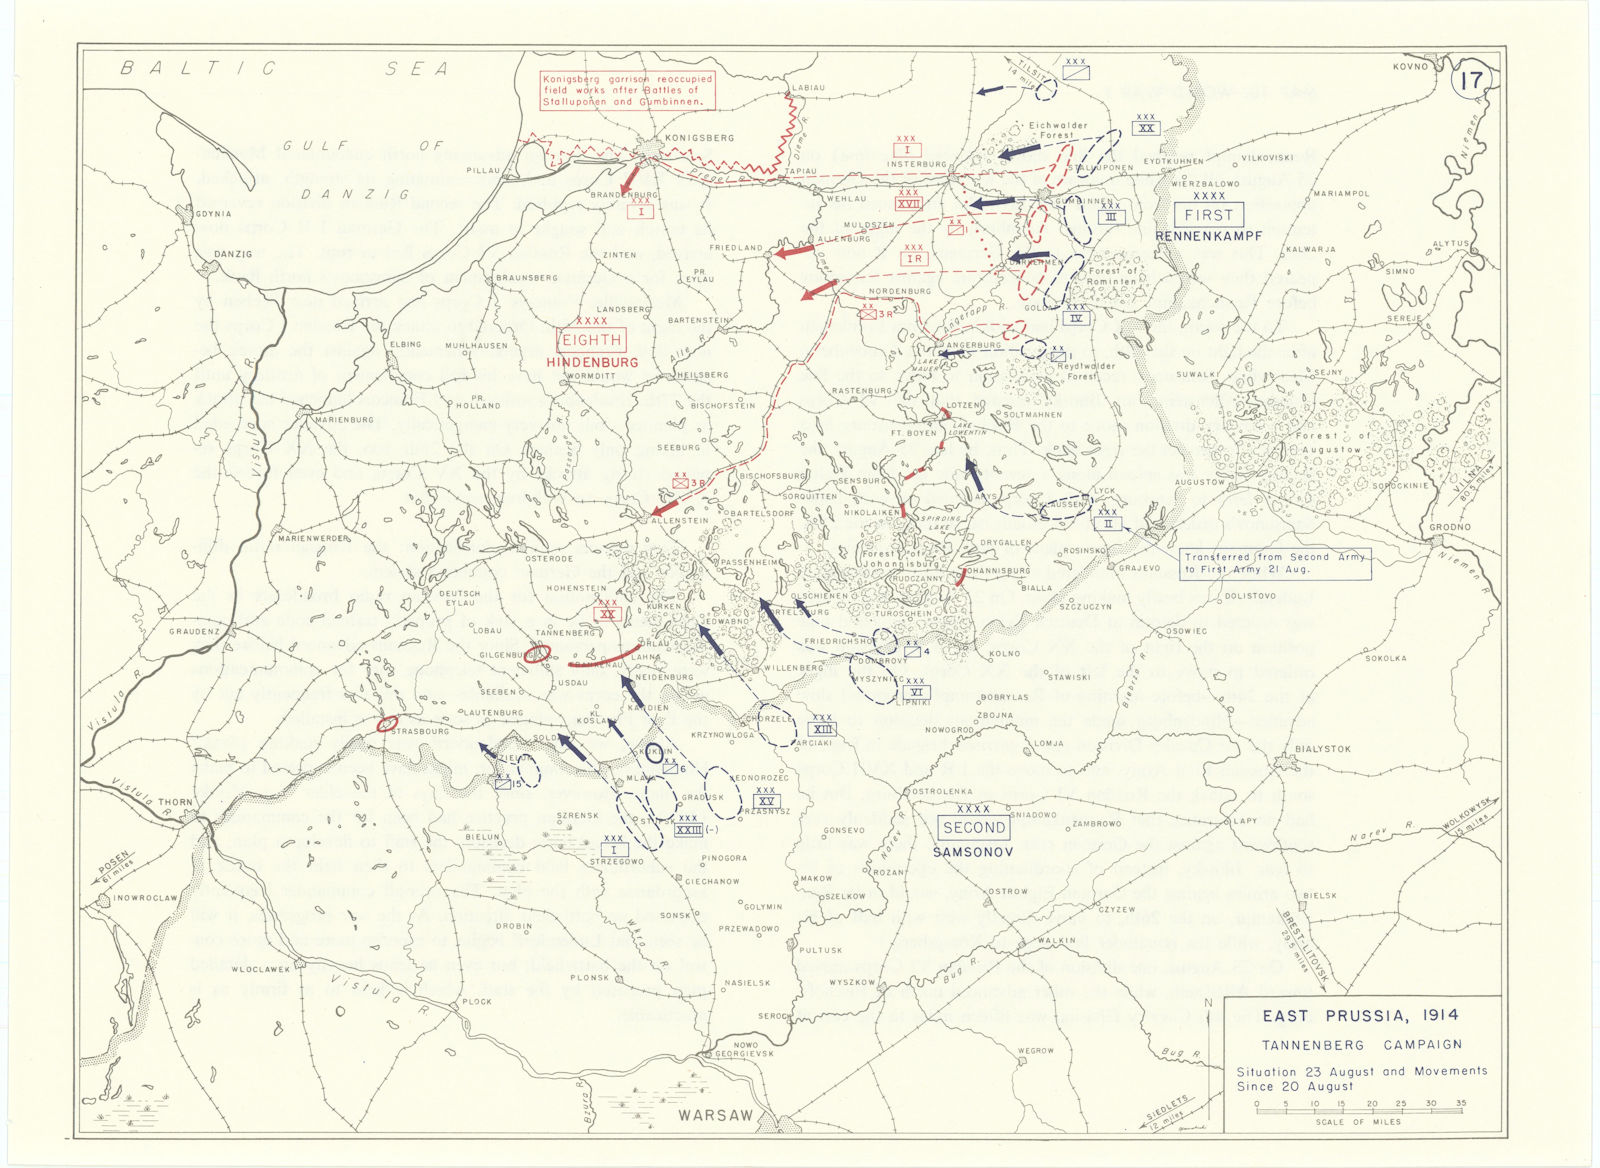 World War 1. East Prussia 20-23 August 1914. Tannenberg Campaign 1959 old map